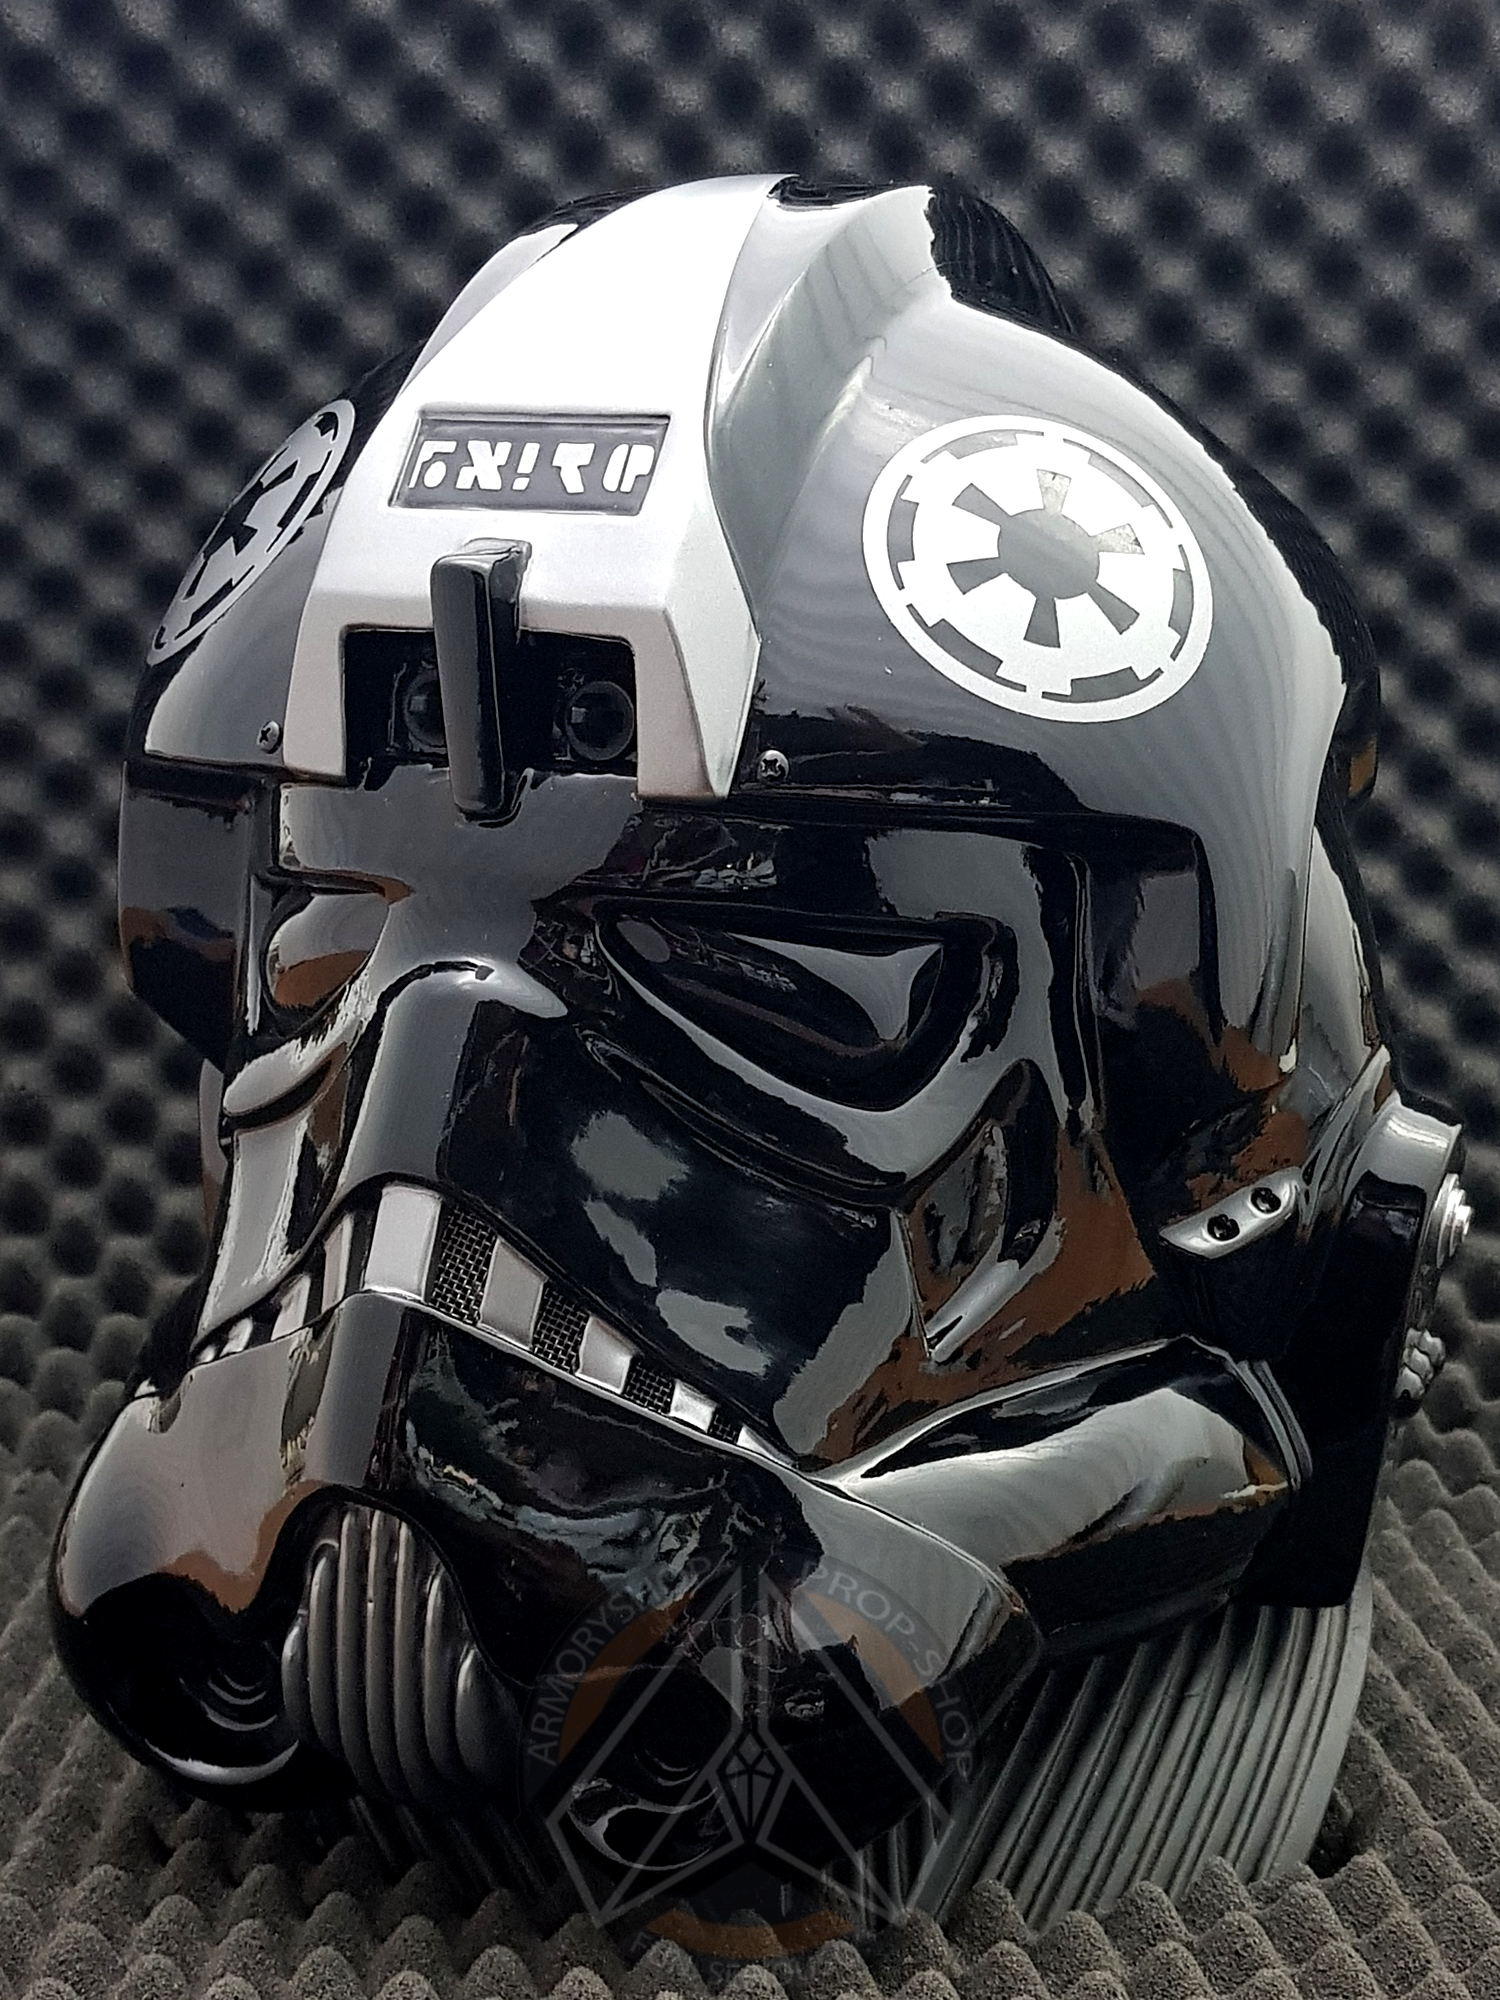 Imperial TIE Pilot Helmet Lt. OXIXO Variant (Clean, Finished)